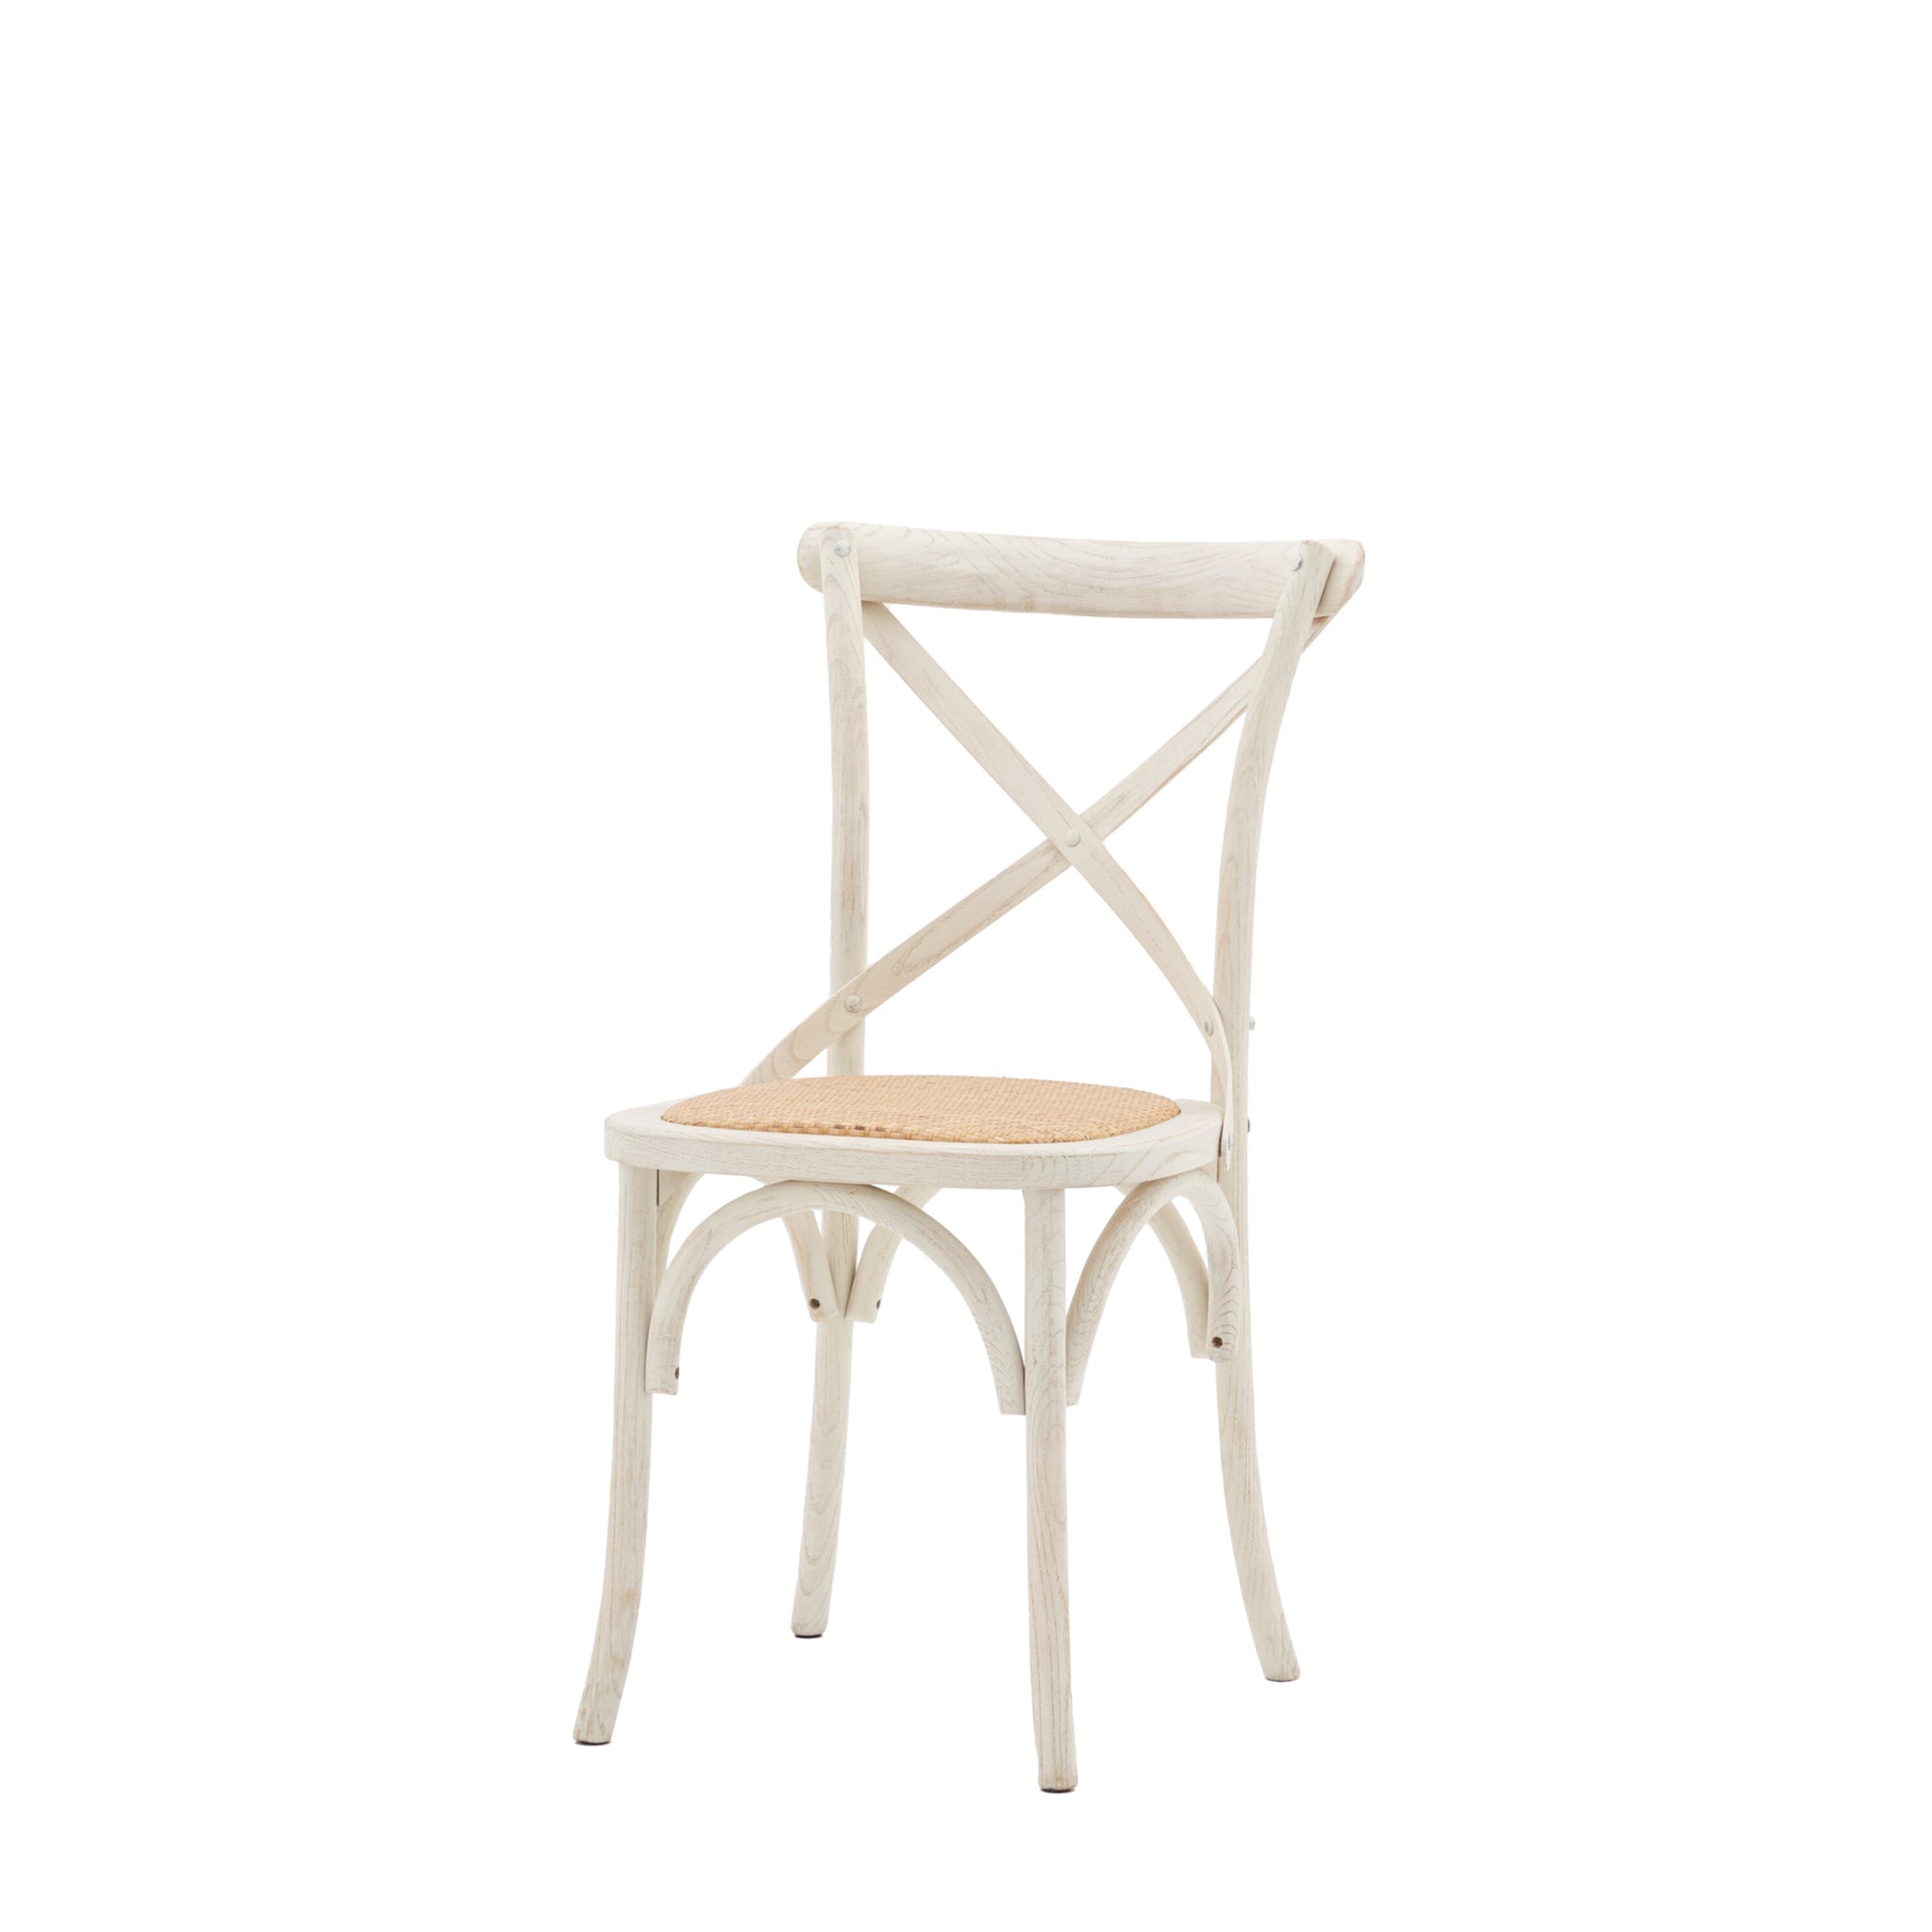 Wooden X Back Dining Chair | White/Rattan (2 Pack)